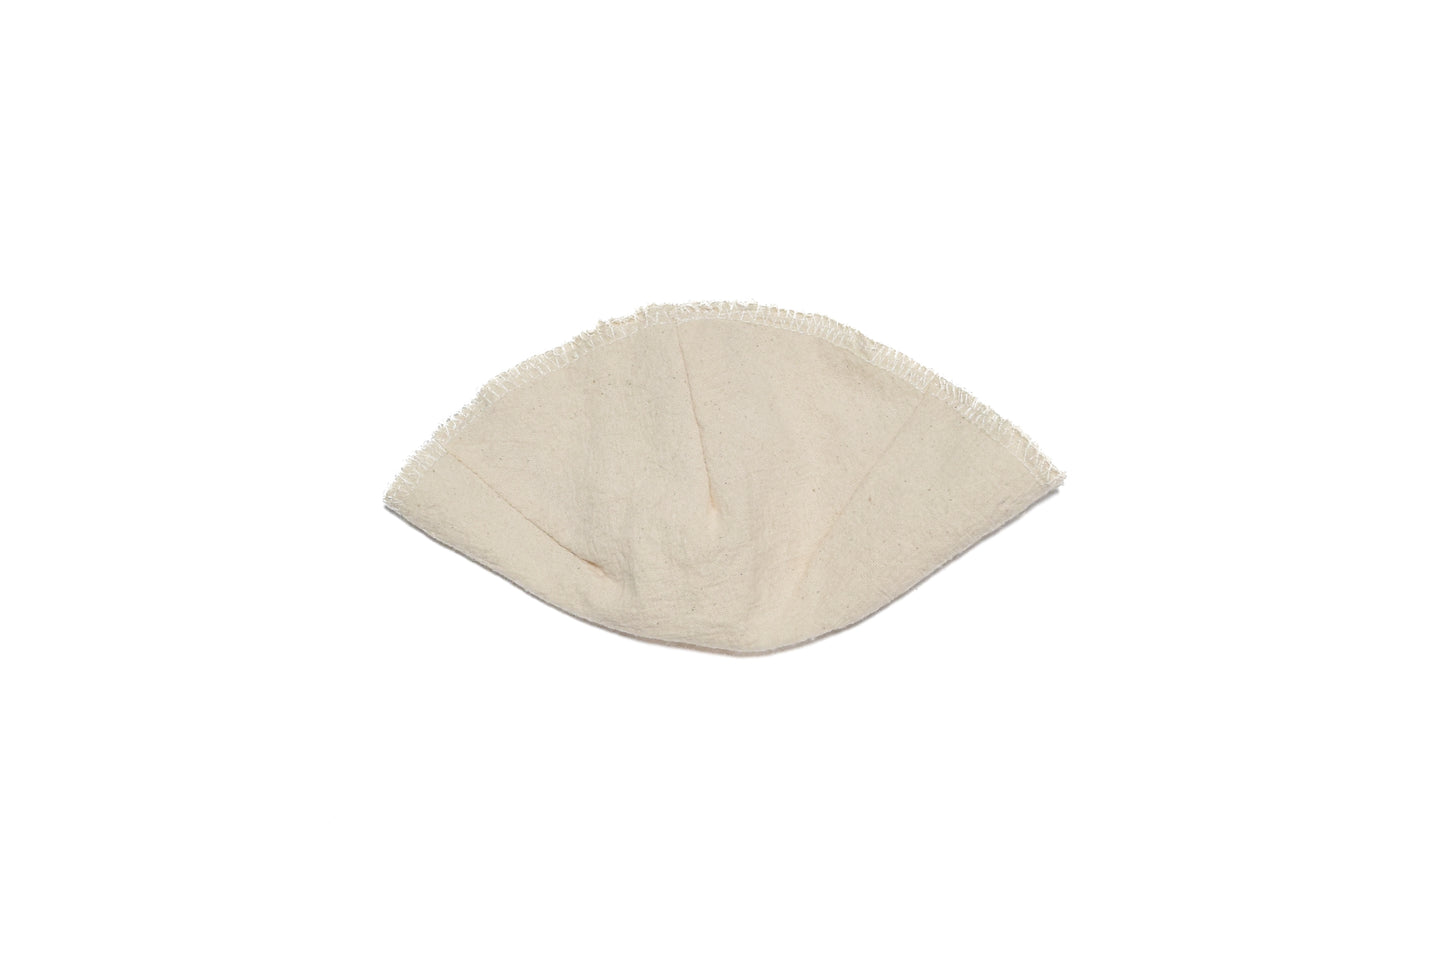 The Stitchery - Organic Cotton Reusable Coffee Filters